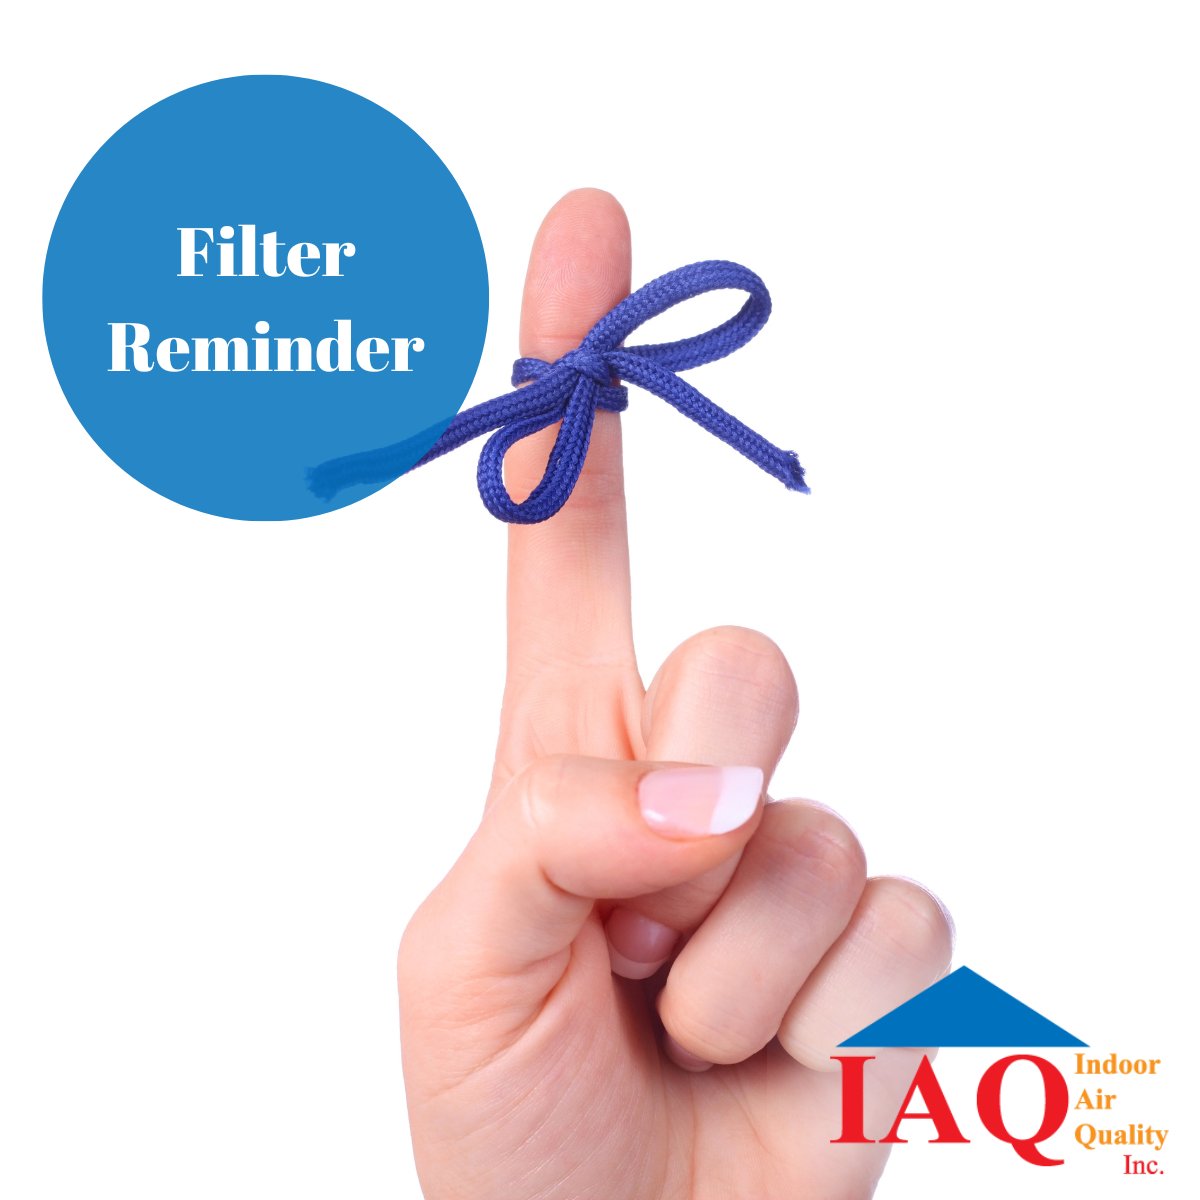 Remember to prioritize your indoor air quality. Regular filter changes promote healthier, cleaner air for all.  It's especially beneficial for the young, elderly, and those suffering from respiratory ailments.

#HVACDenver #HVACService #HVACTech #EnergySavingTips #IAQ